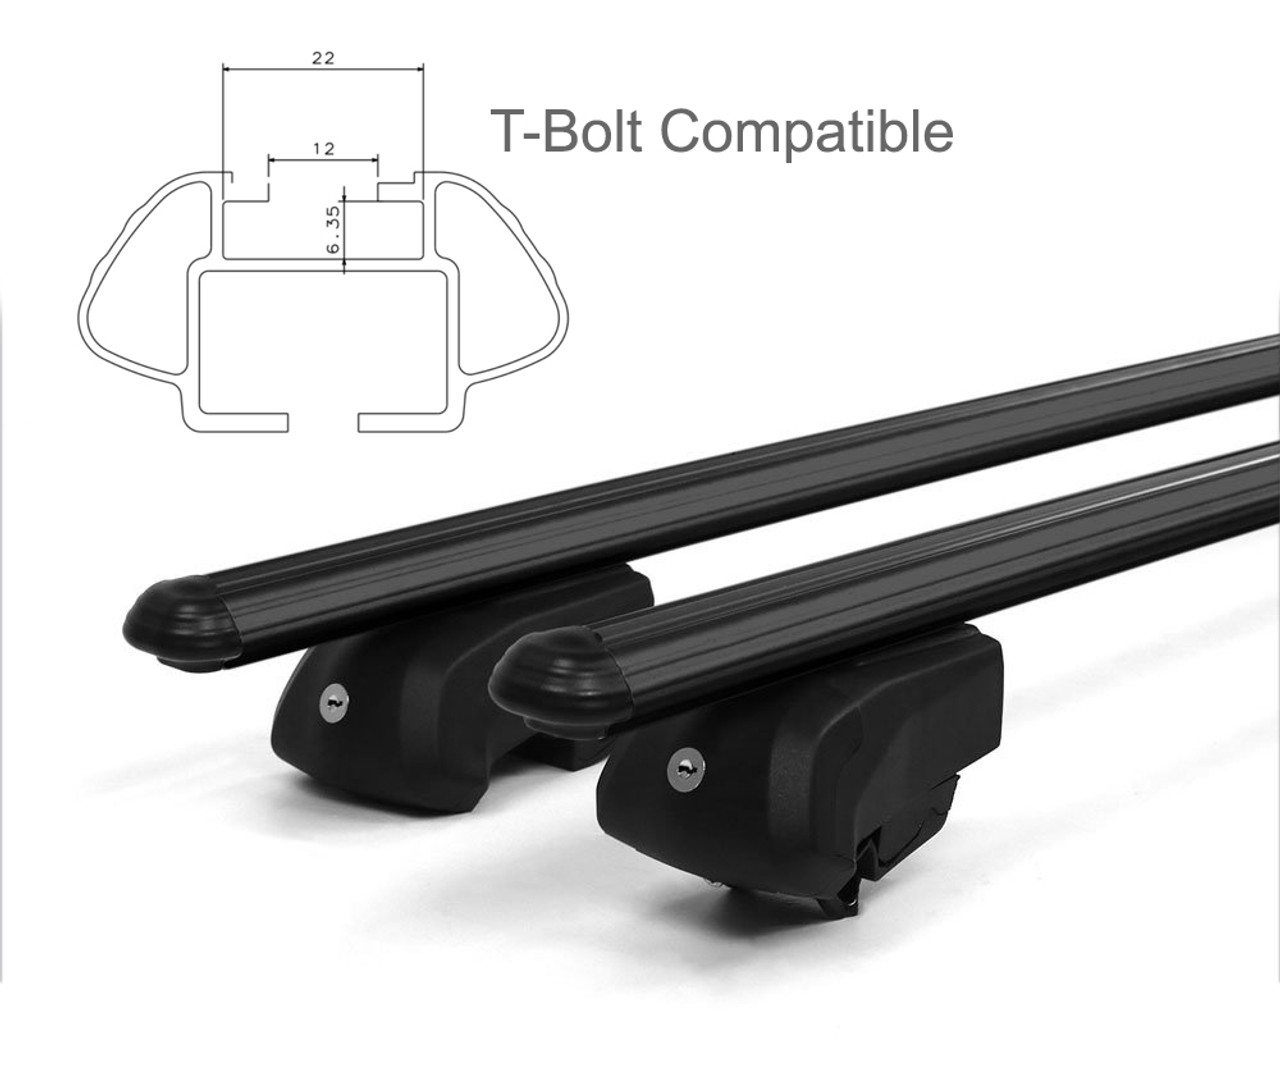 Black Cross Bars For Roof Rails To Fit Ford Galaxy (2010-15) 75KG Lockable